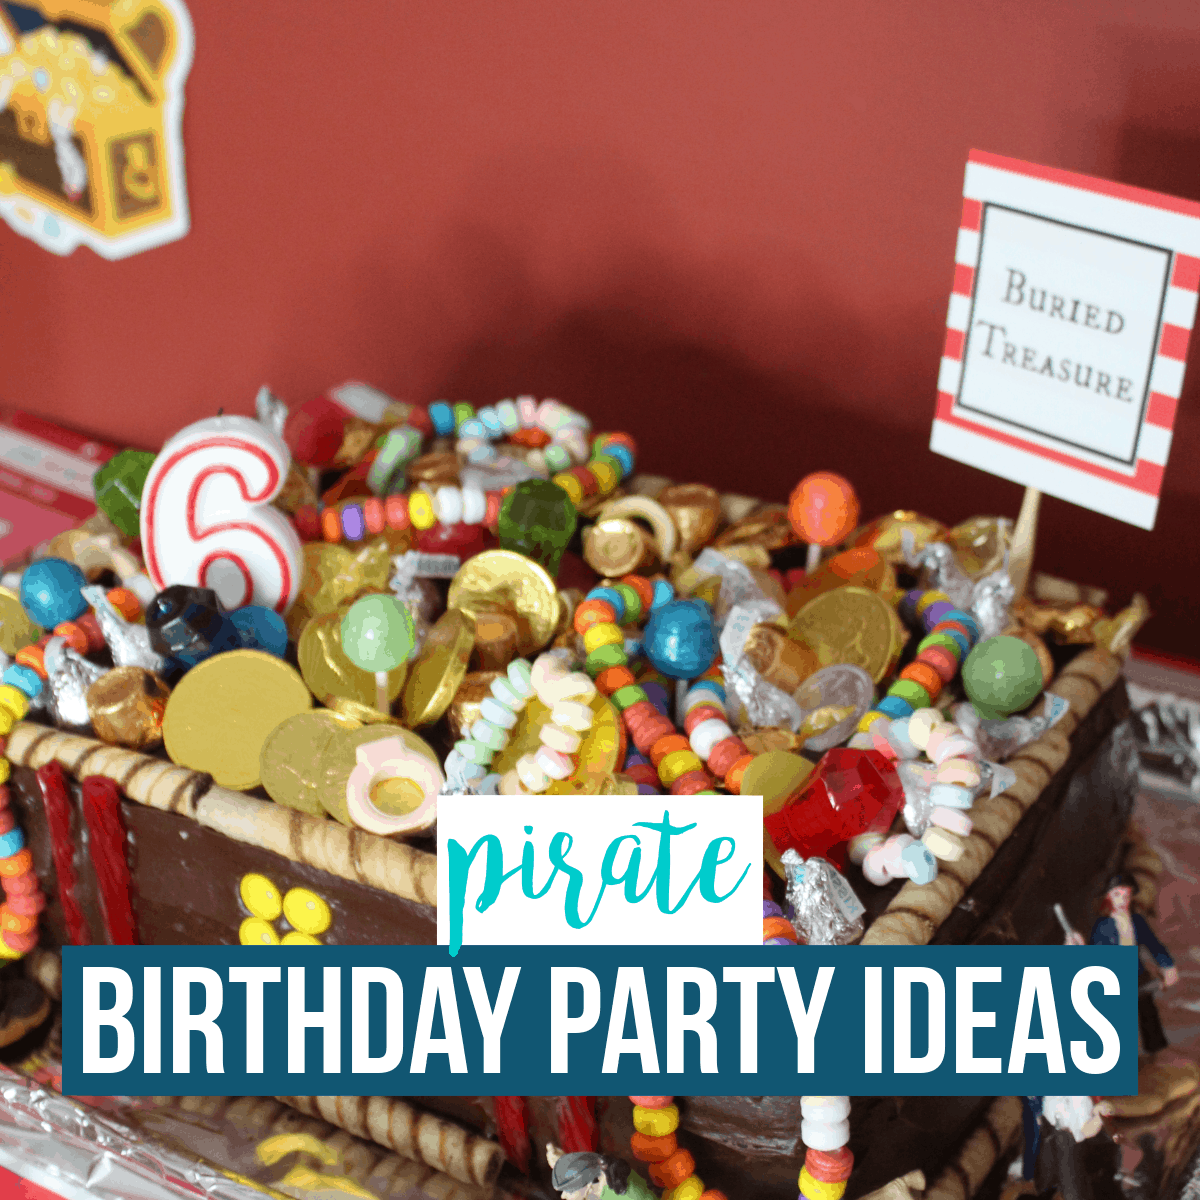 Pirate Party Decorations: Create a Fun Pirate Atmosphere